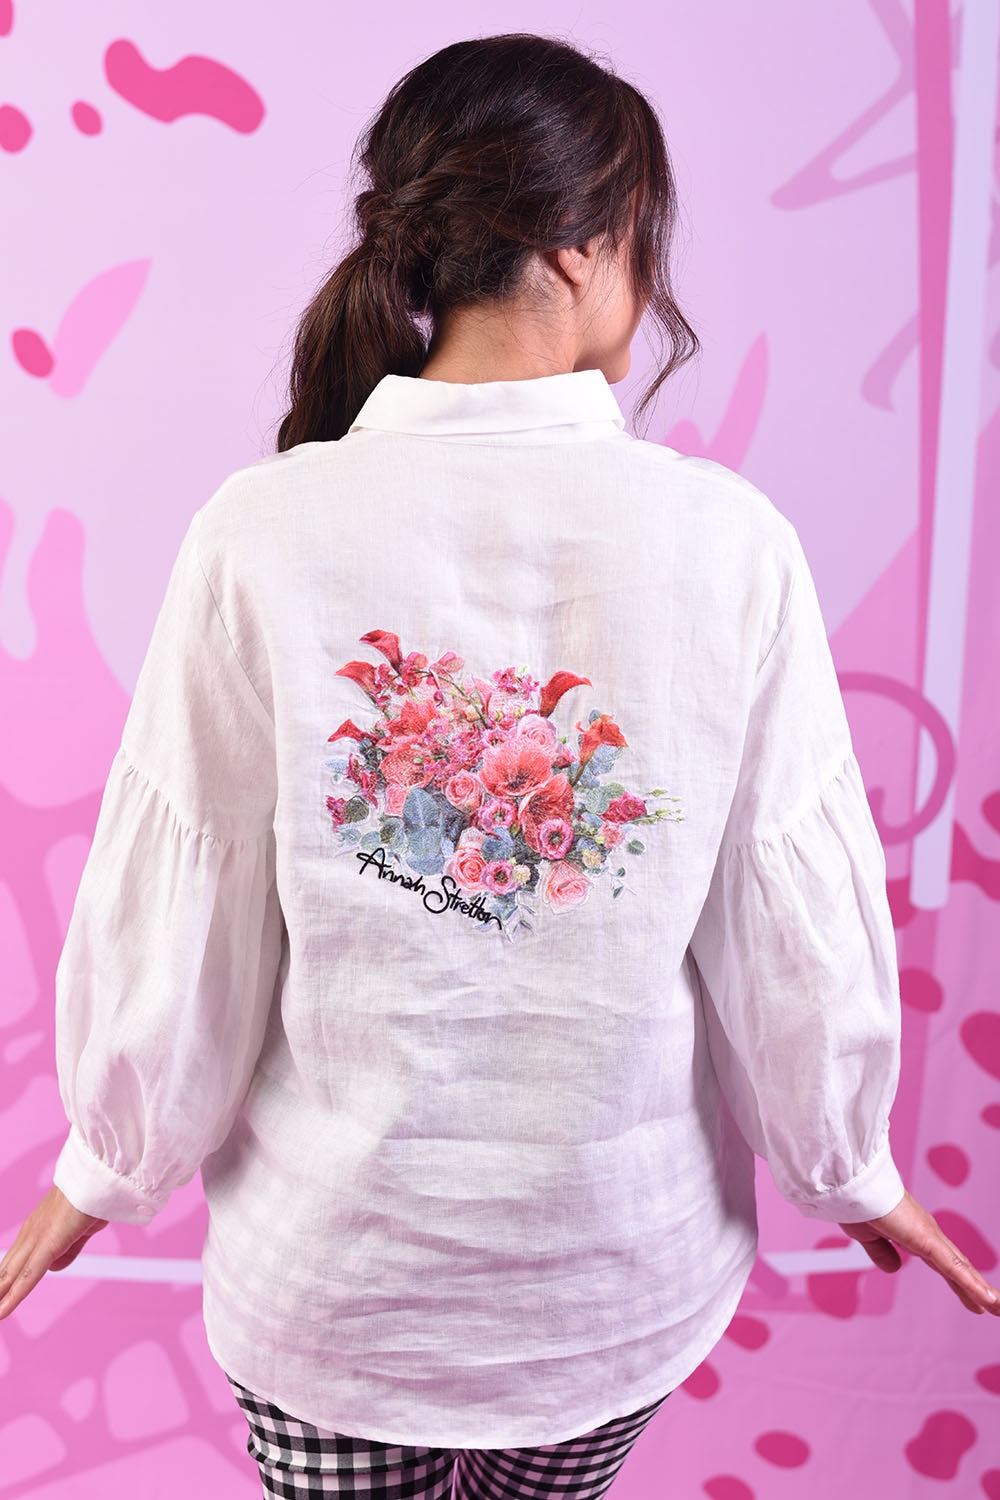 Back of Model wearing Popo Linen shirt with embroidery by Annah Stretton